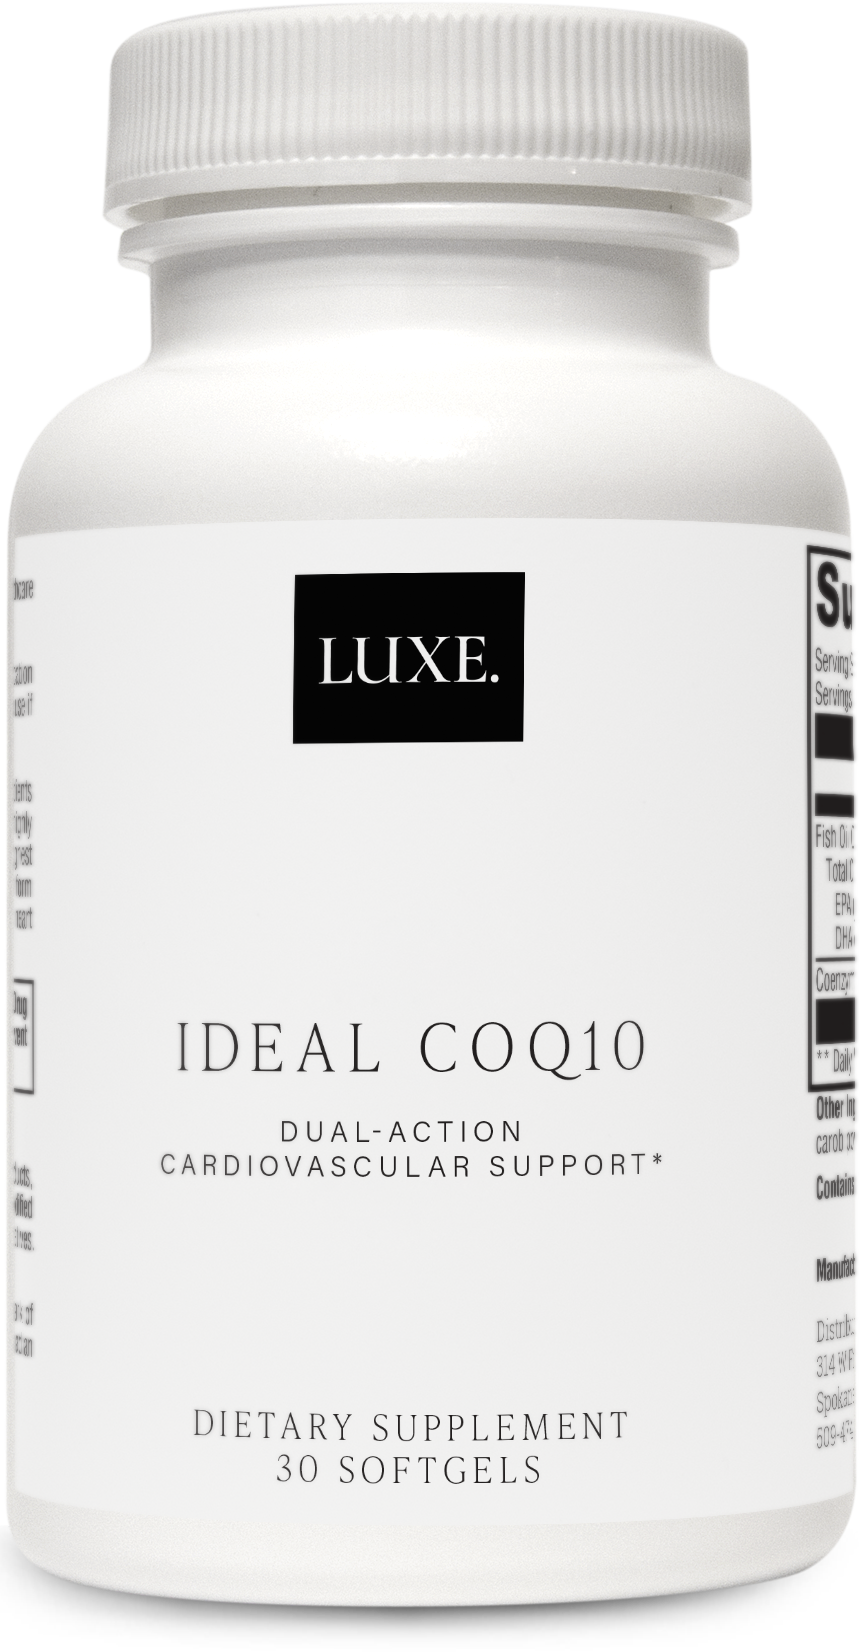 LUXE., Ideal CoQ10